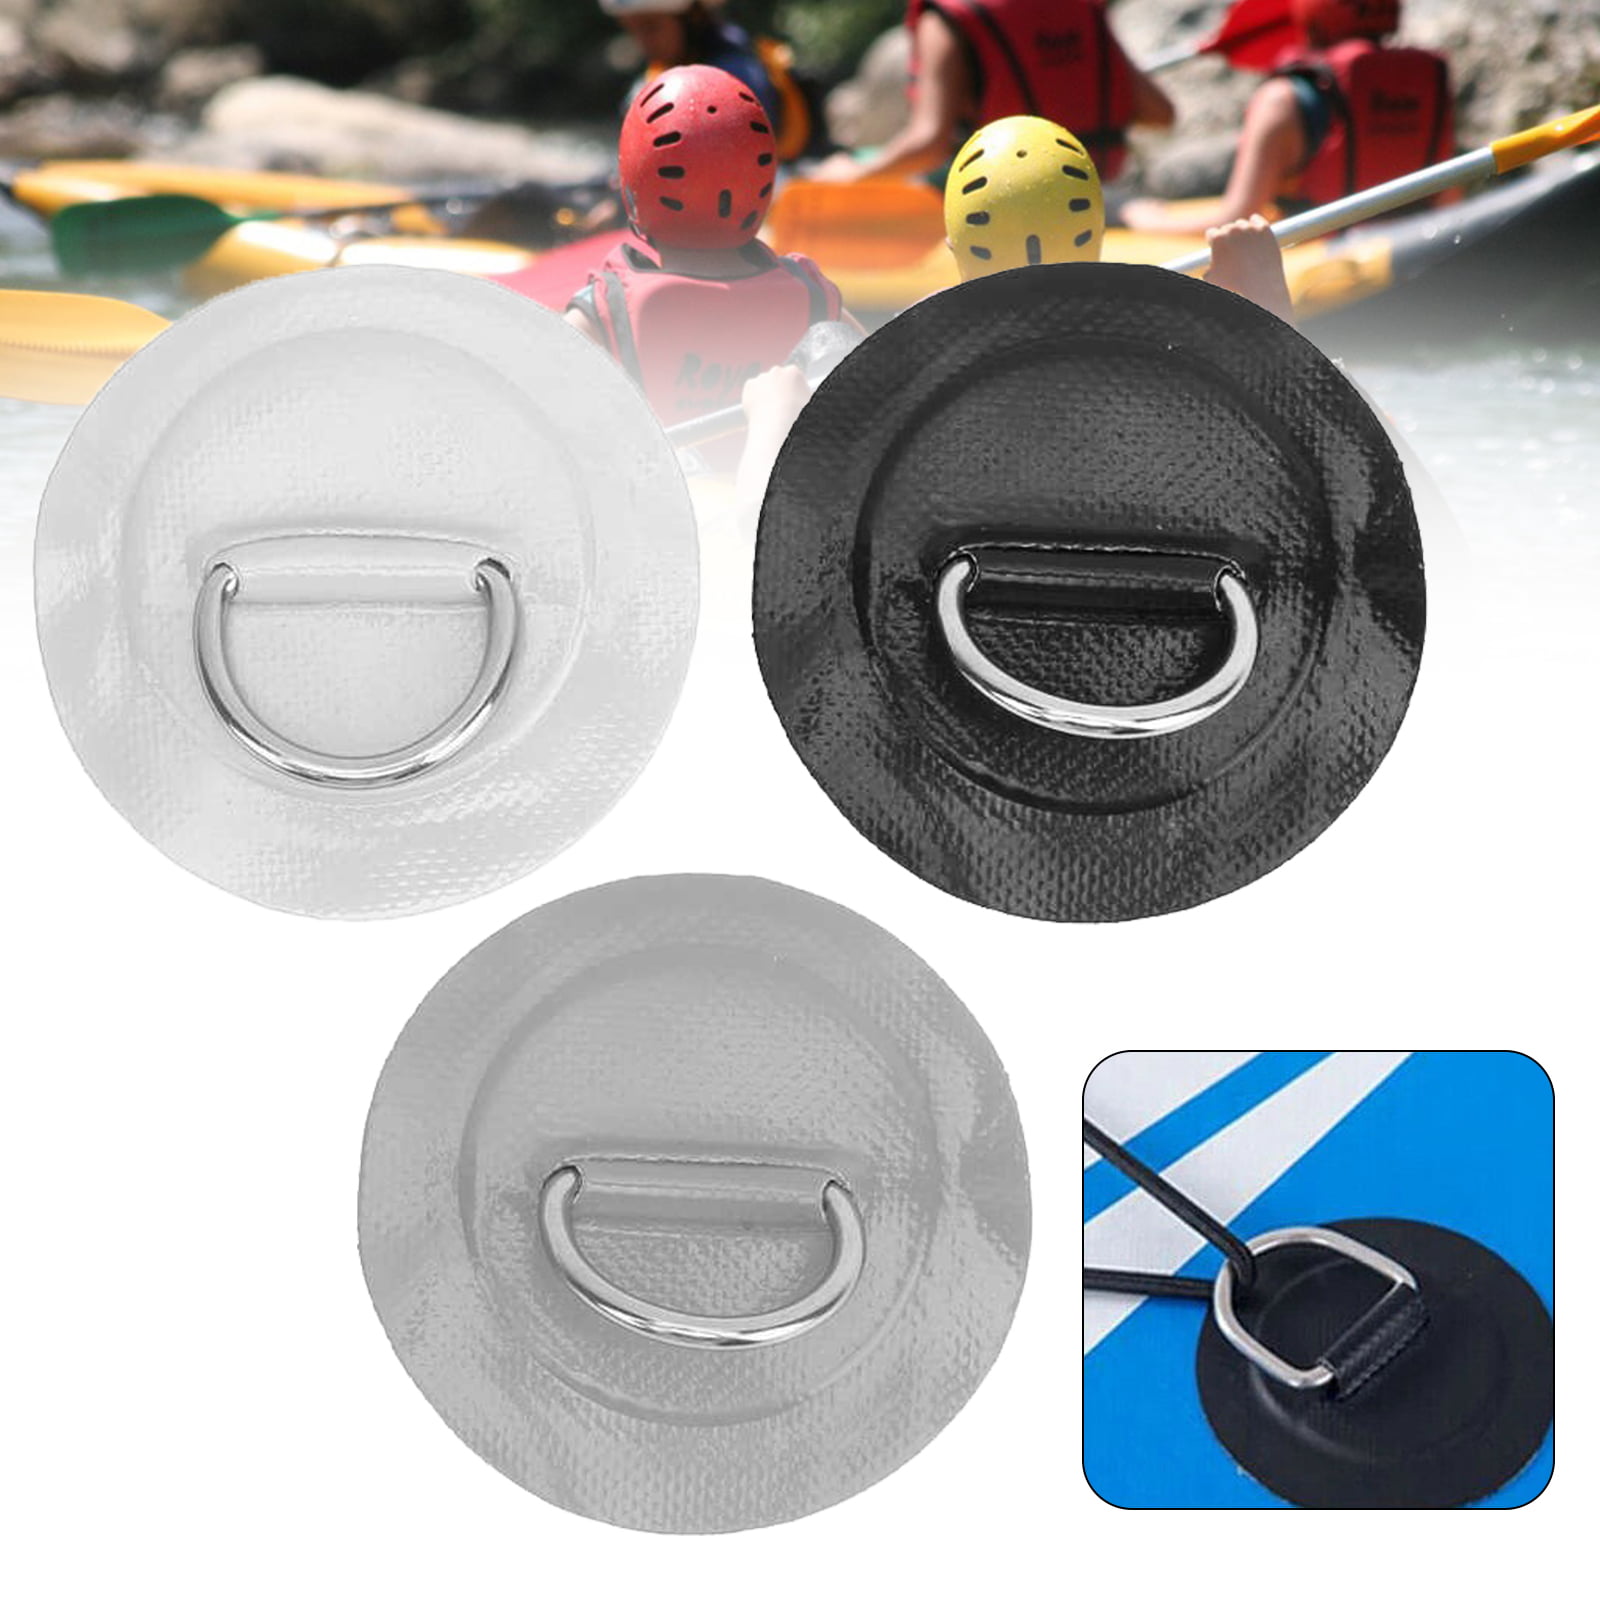 4 Stainless Steel D-ring Pad/Patch 11cm for PVC Inflatable Boat Kayak Dinghy 